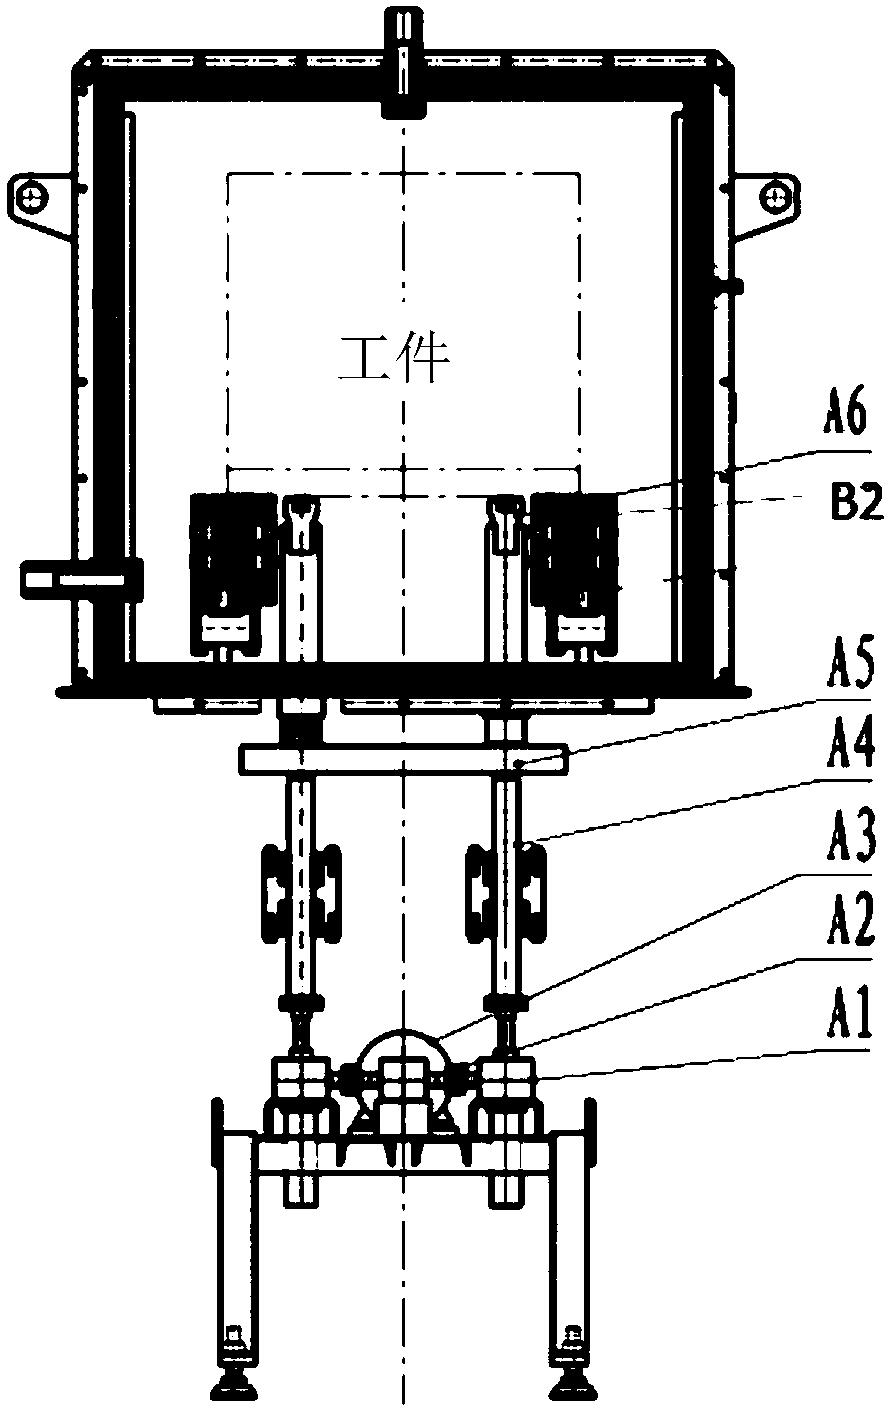 A feeding system of a double-chamber vacuum furnace for heat treatment